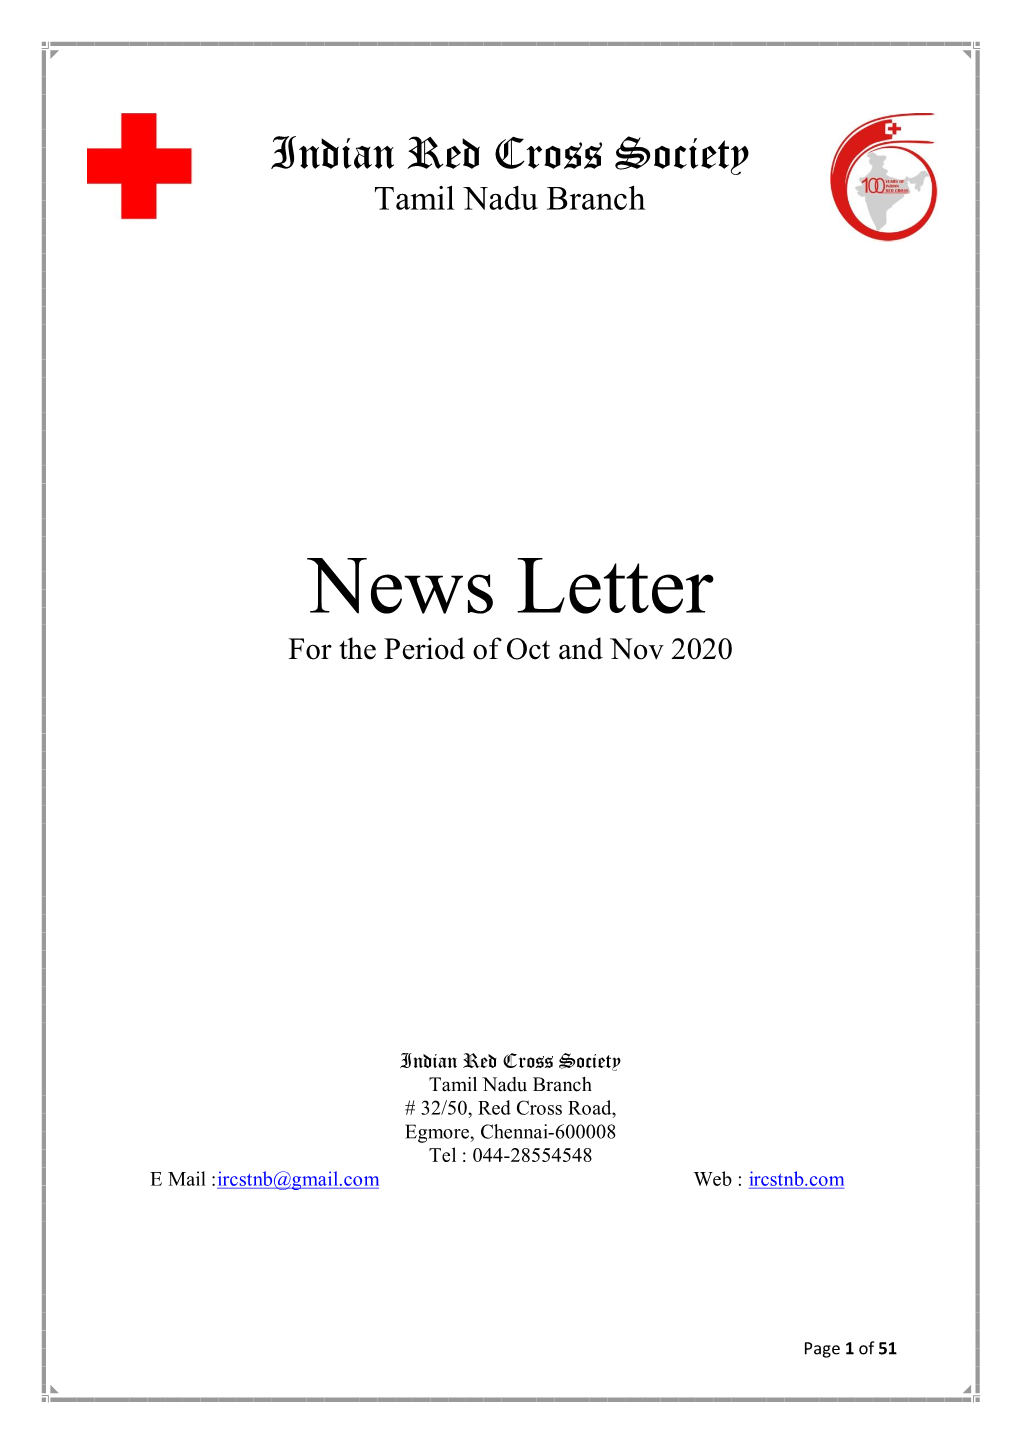 News Letter for the Period of Oct and Nov 2020